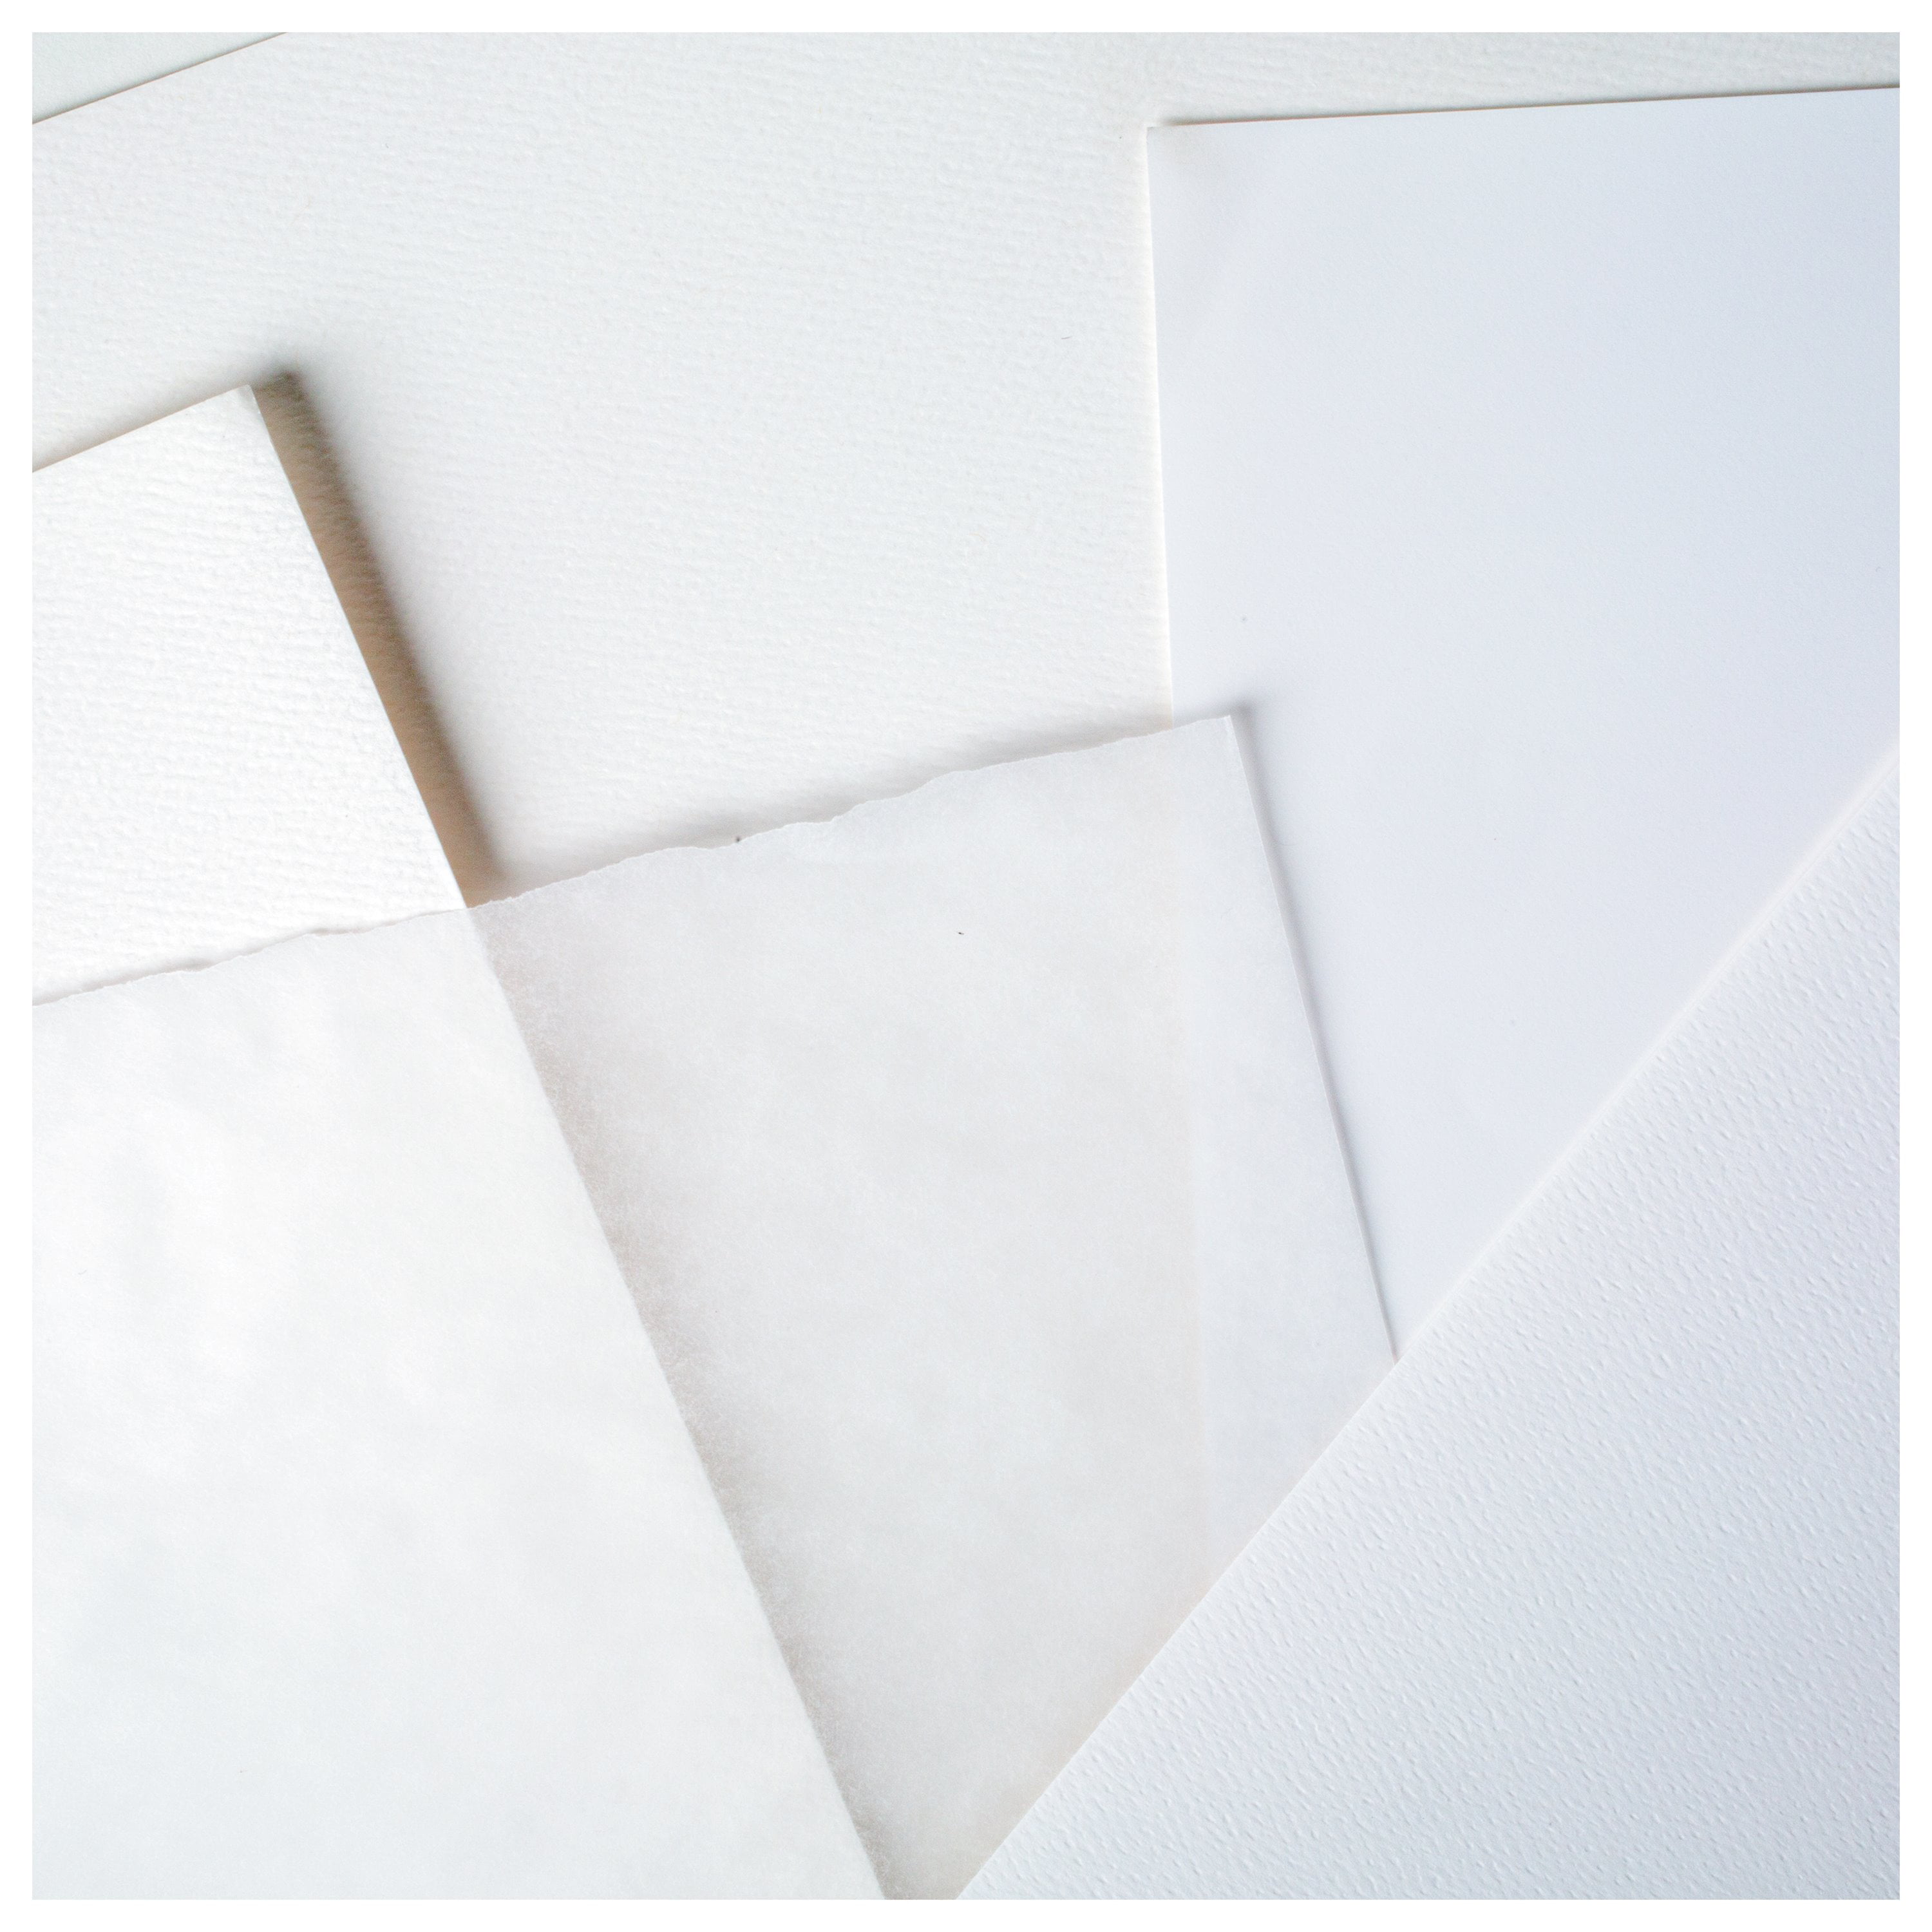 9 x 12 Inches 54994 Derwent Academy Textured Surface Watercolour Paper Pad 15 Sheets